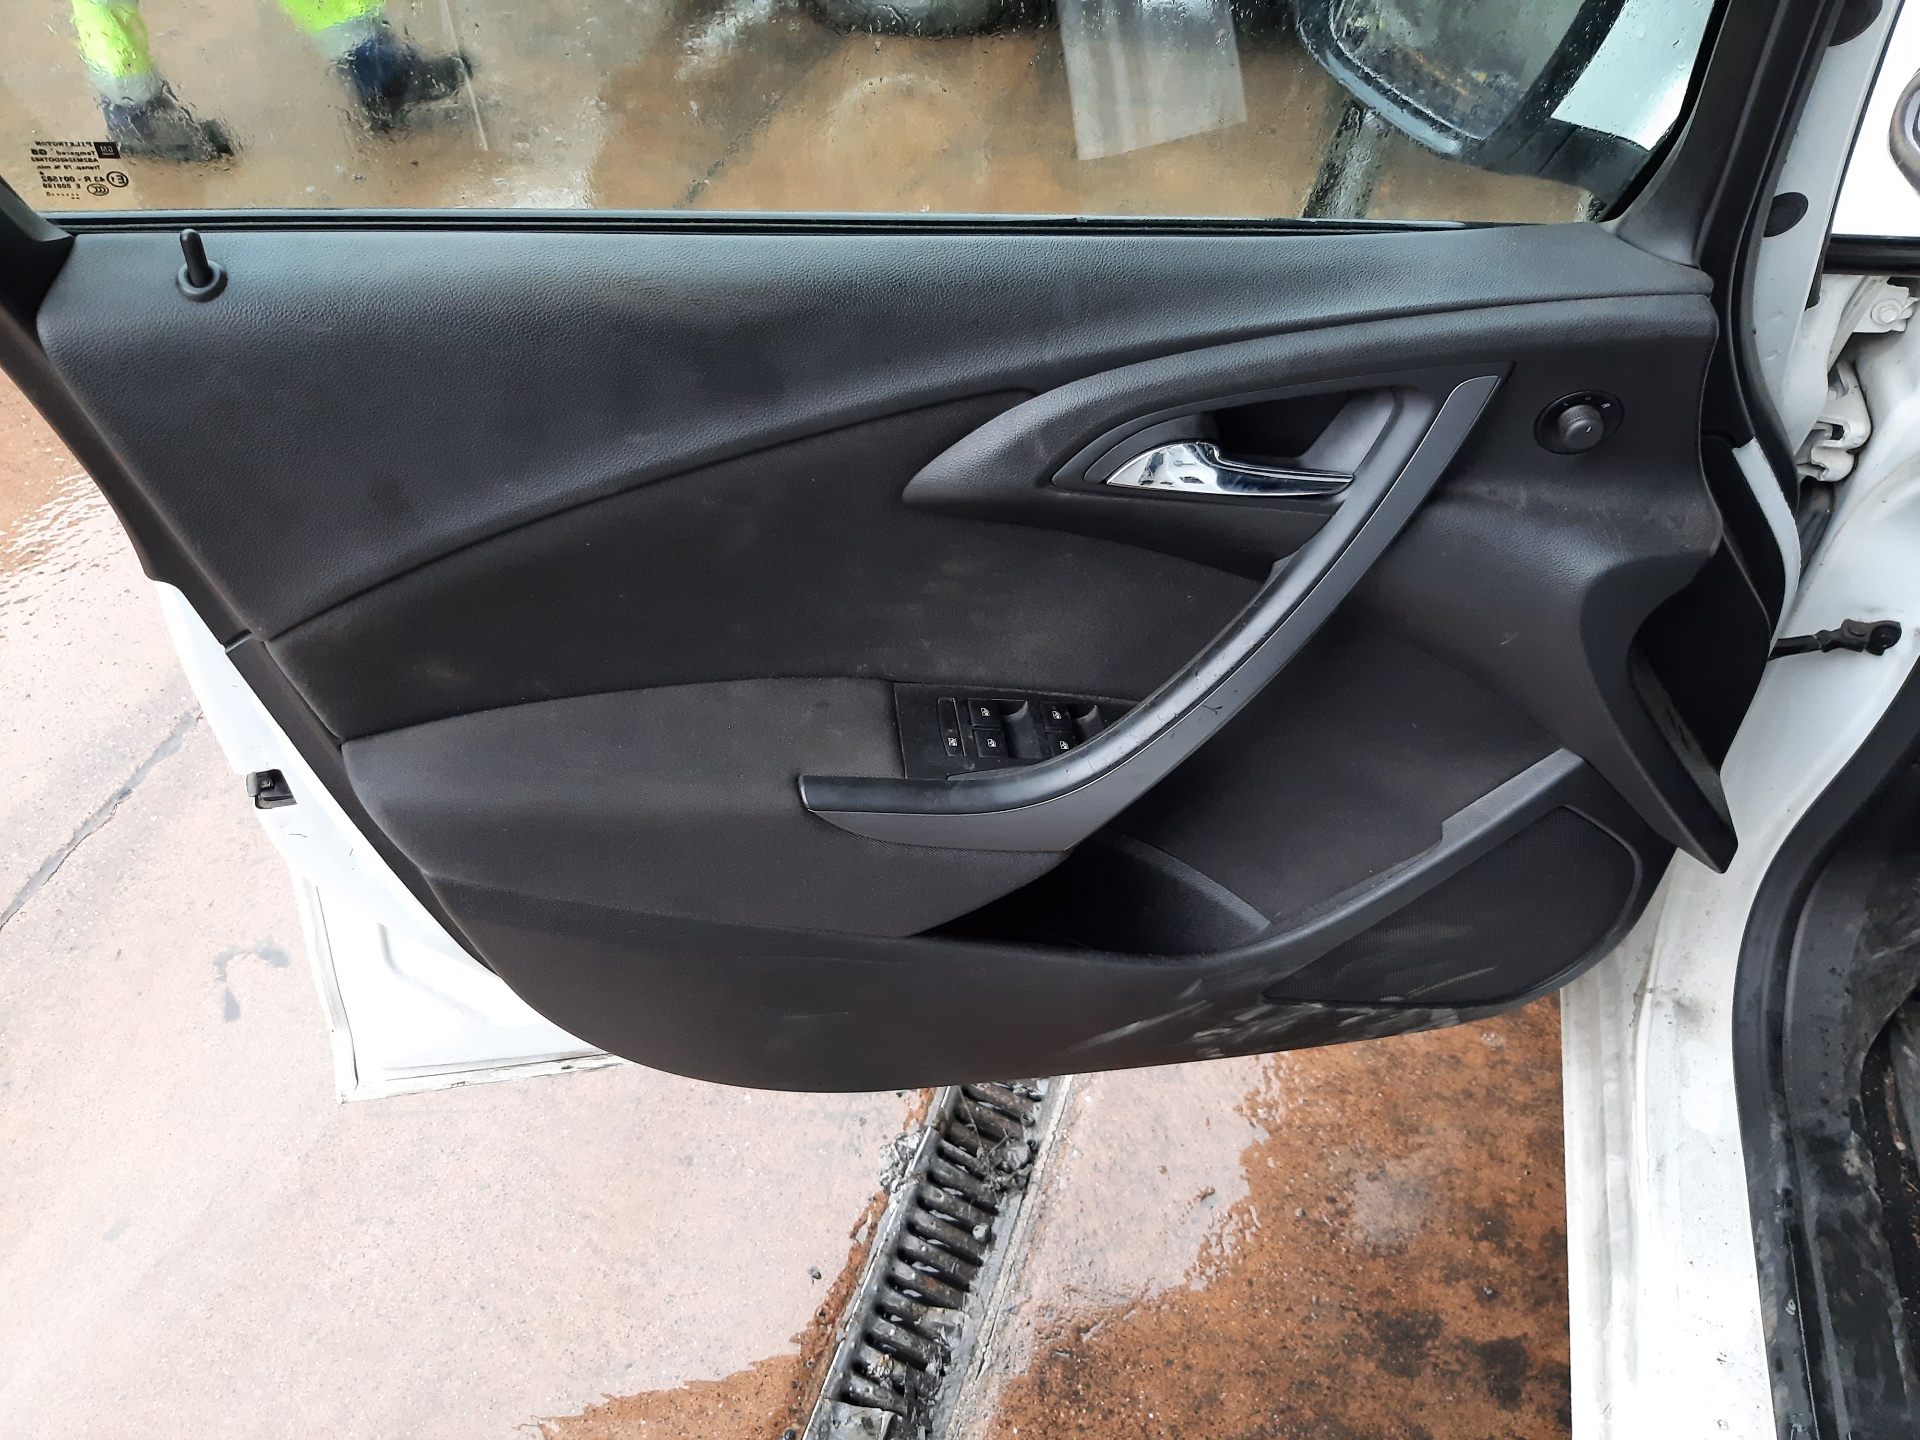 OPEL Astra J (2009-2020) Other Interior Parts 22948484 23127271